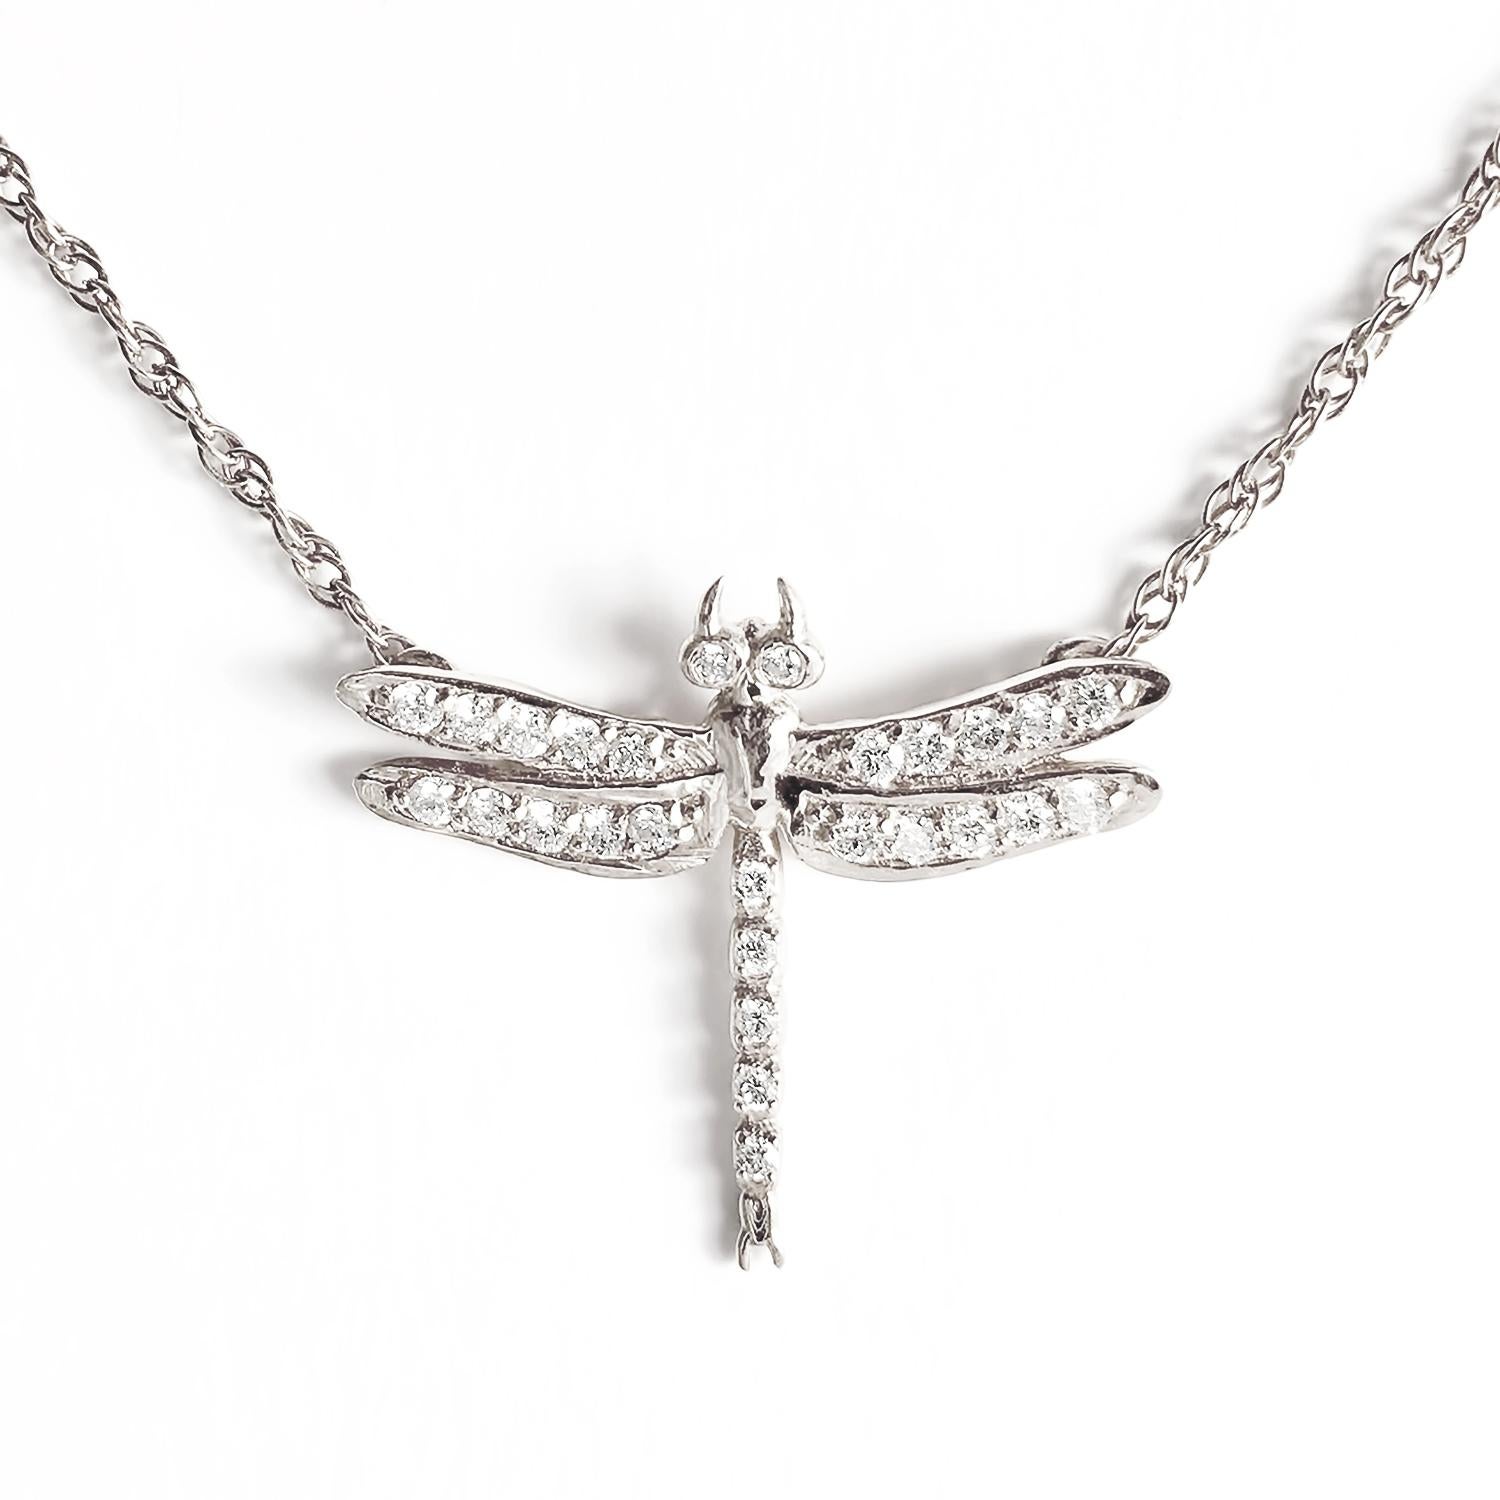 Brilliant Cut Small Dragonfly Diamond Necklace / White Gold For Sale